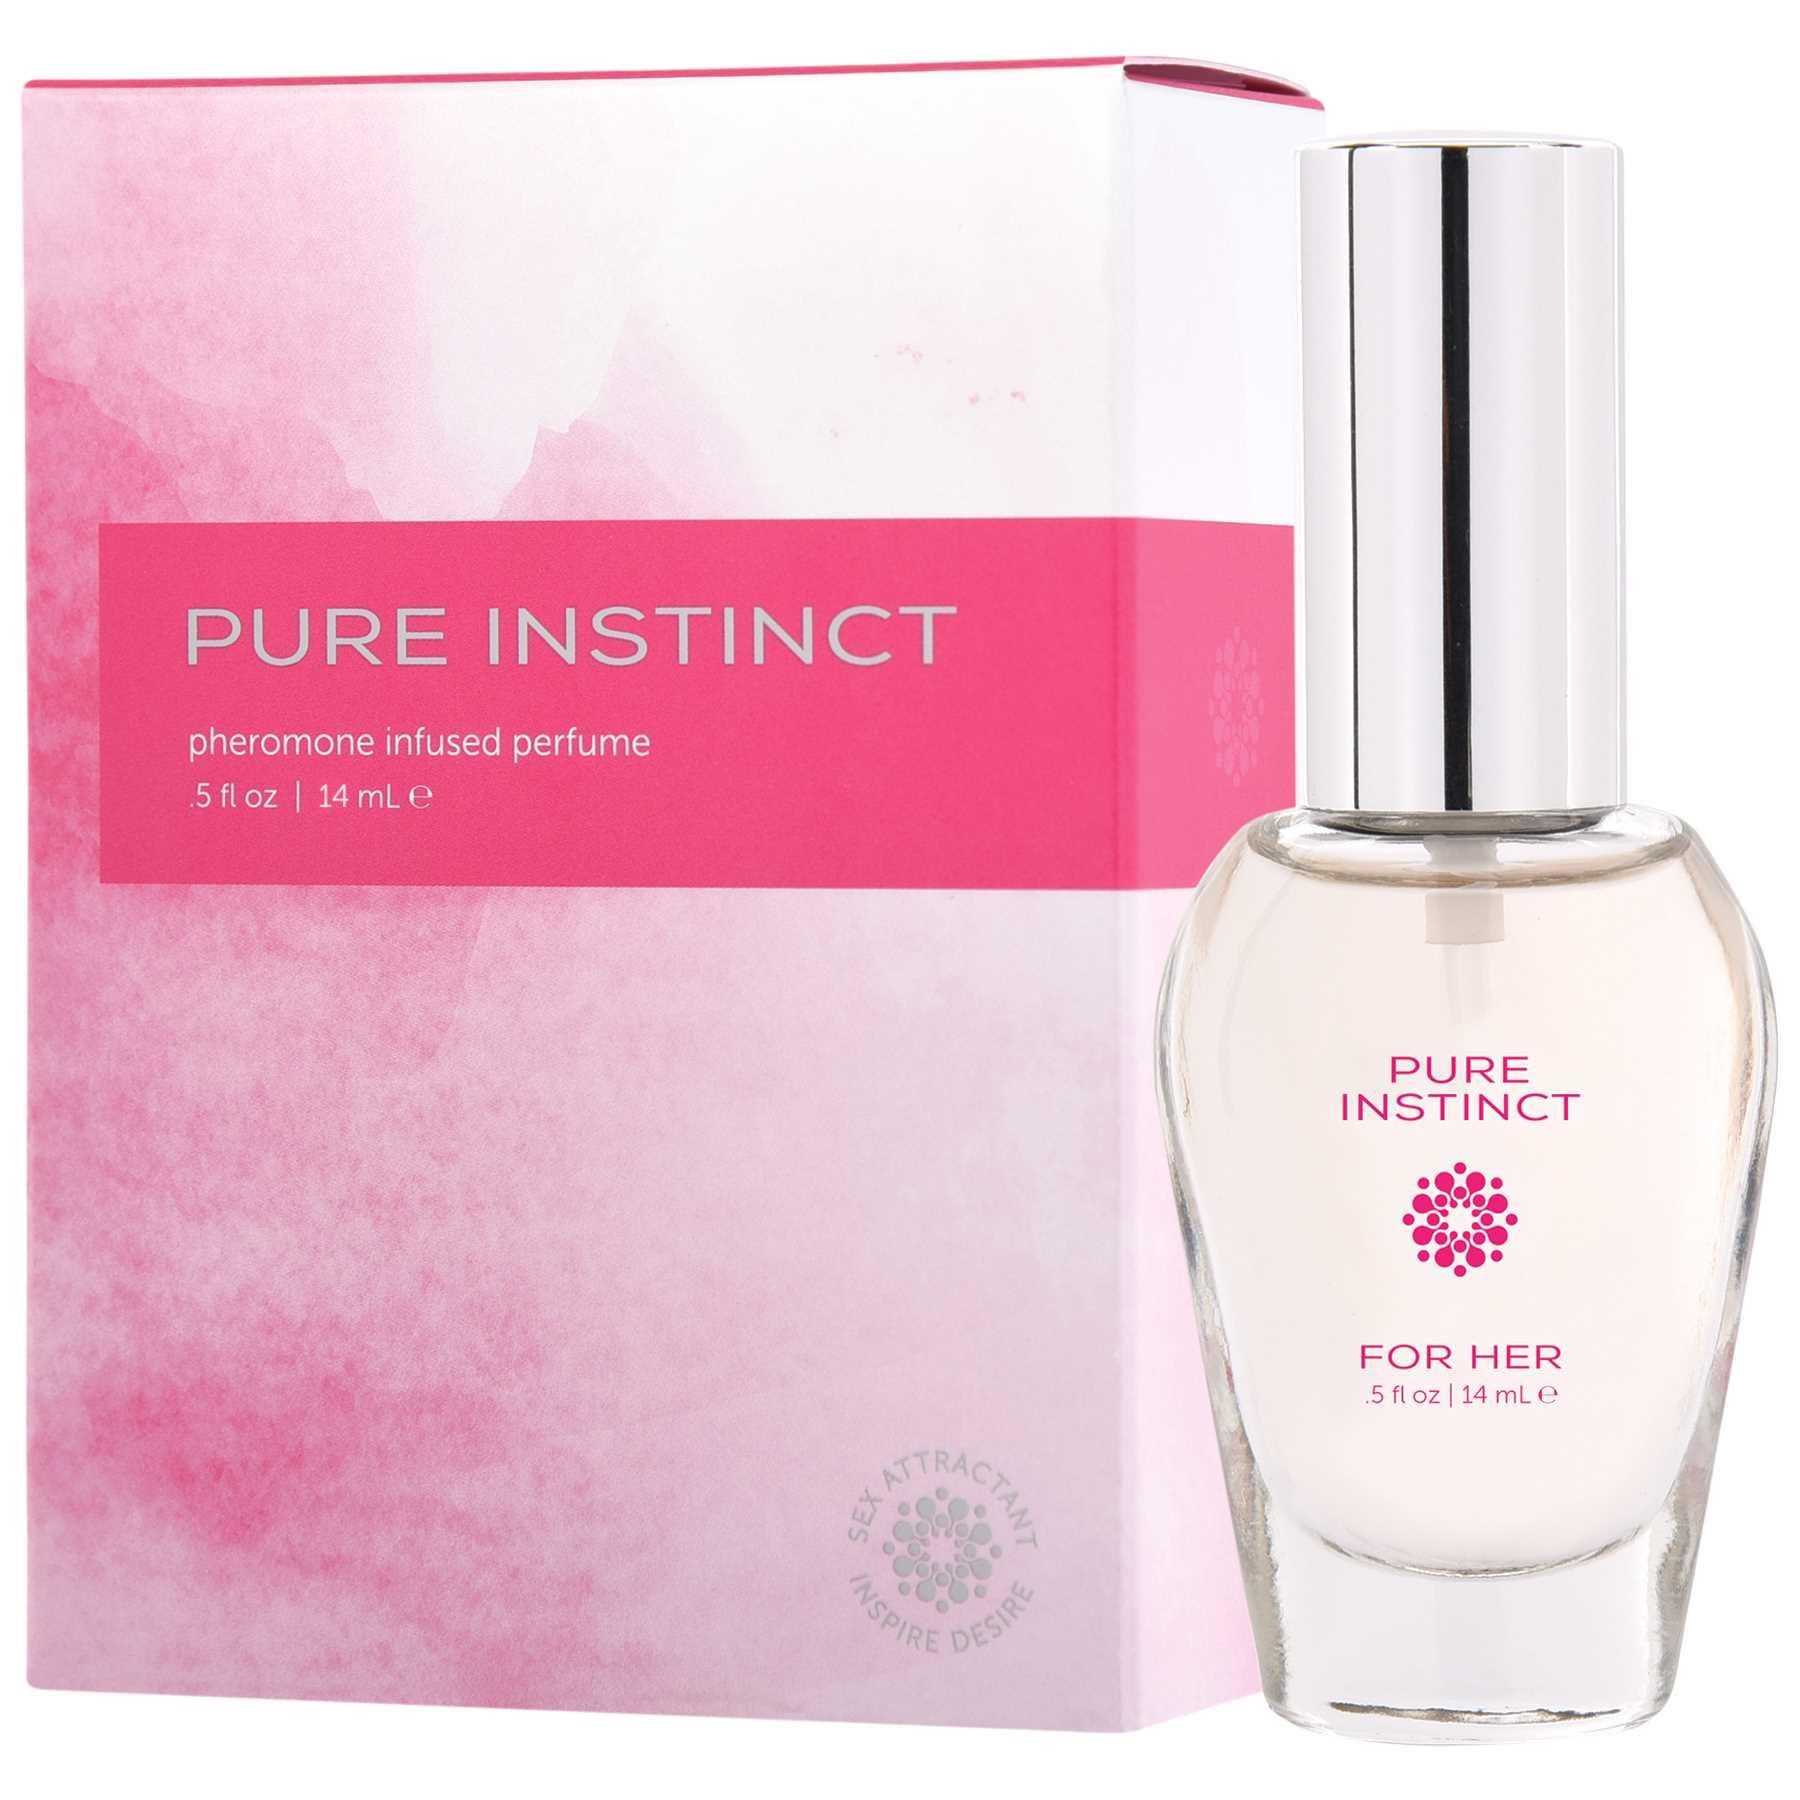 Pure Instinct Perfume For Her bottle and box